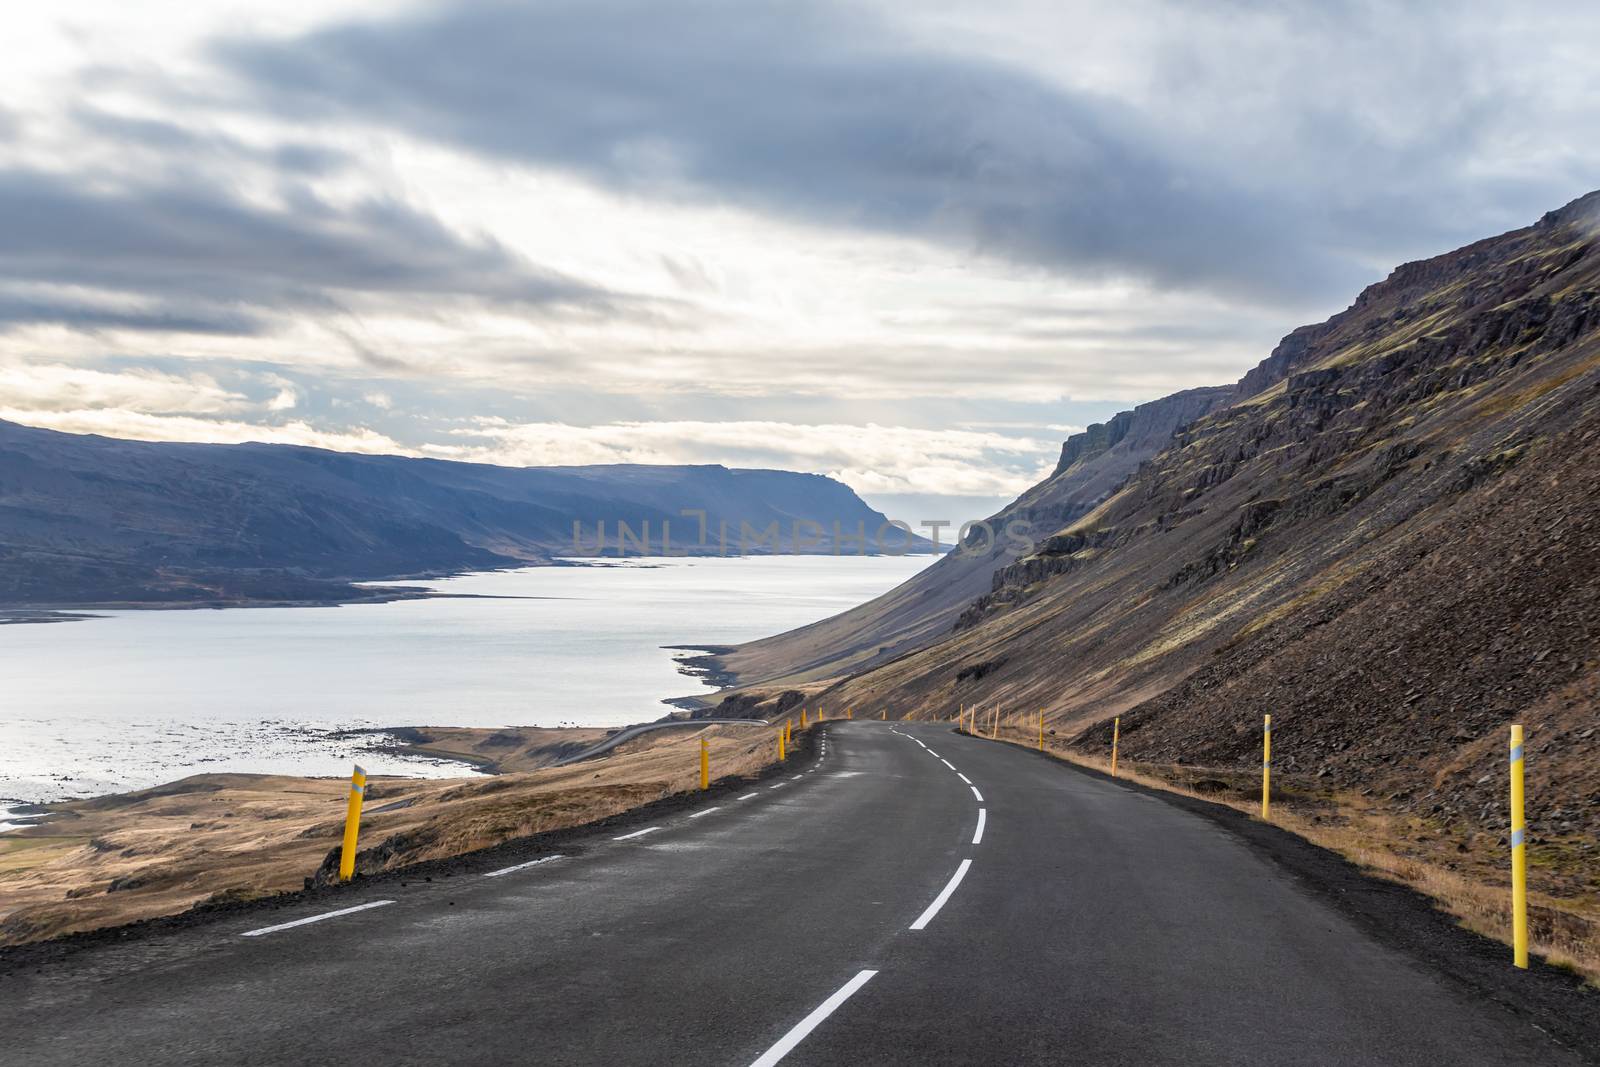 Roadtrip in Iceland steep descent down into fjord between black mountains by MXW_Stock